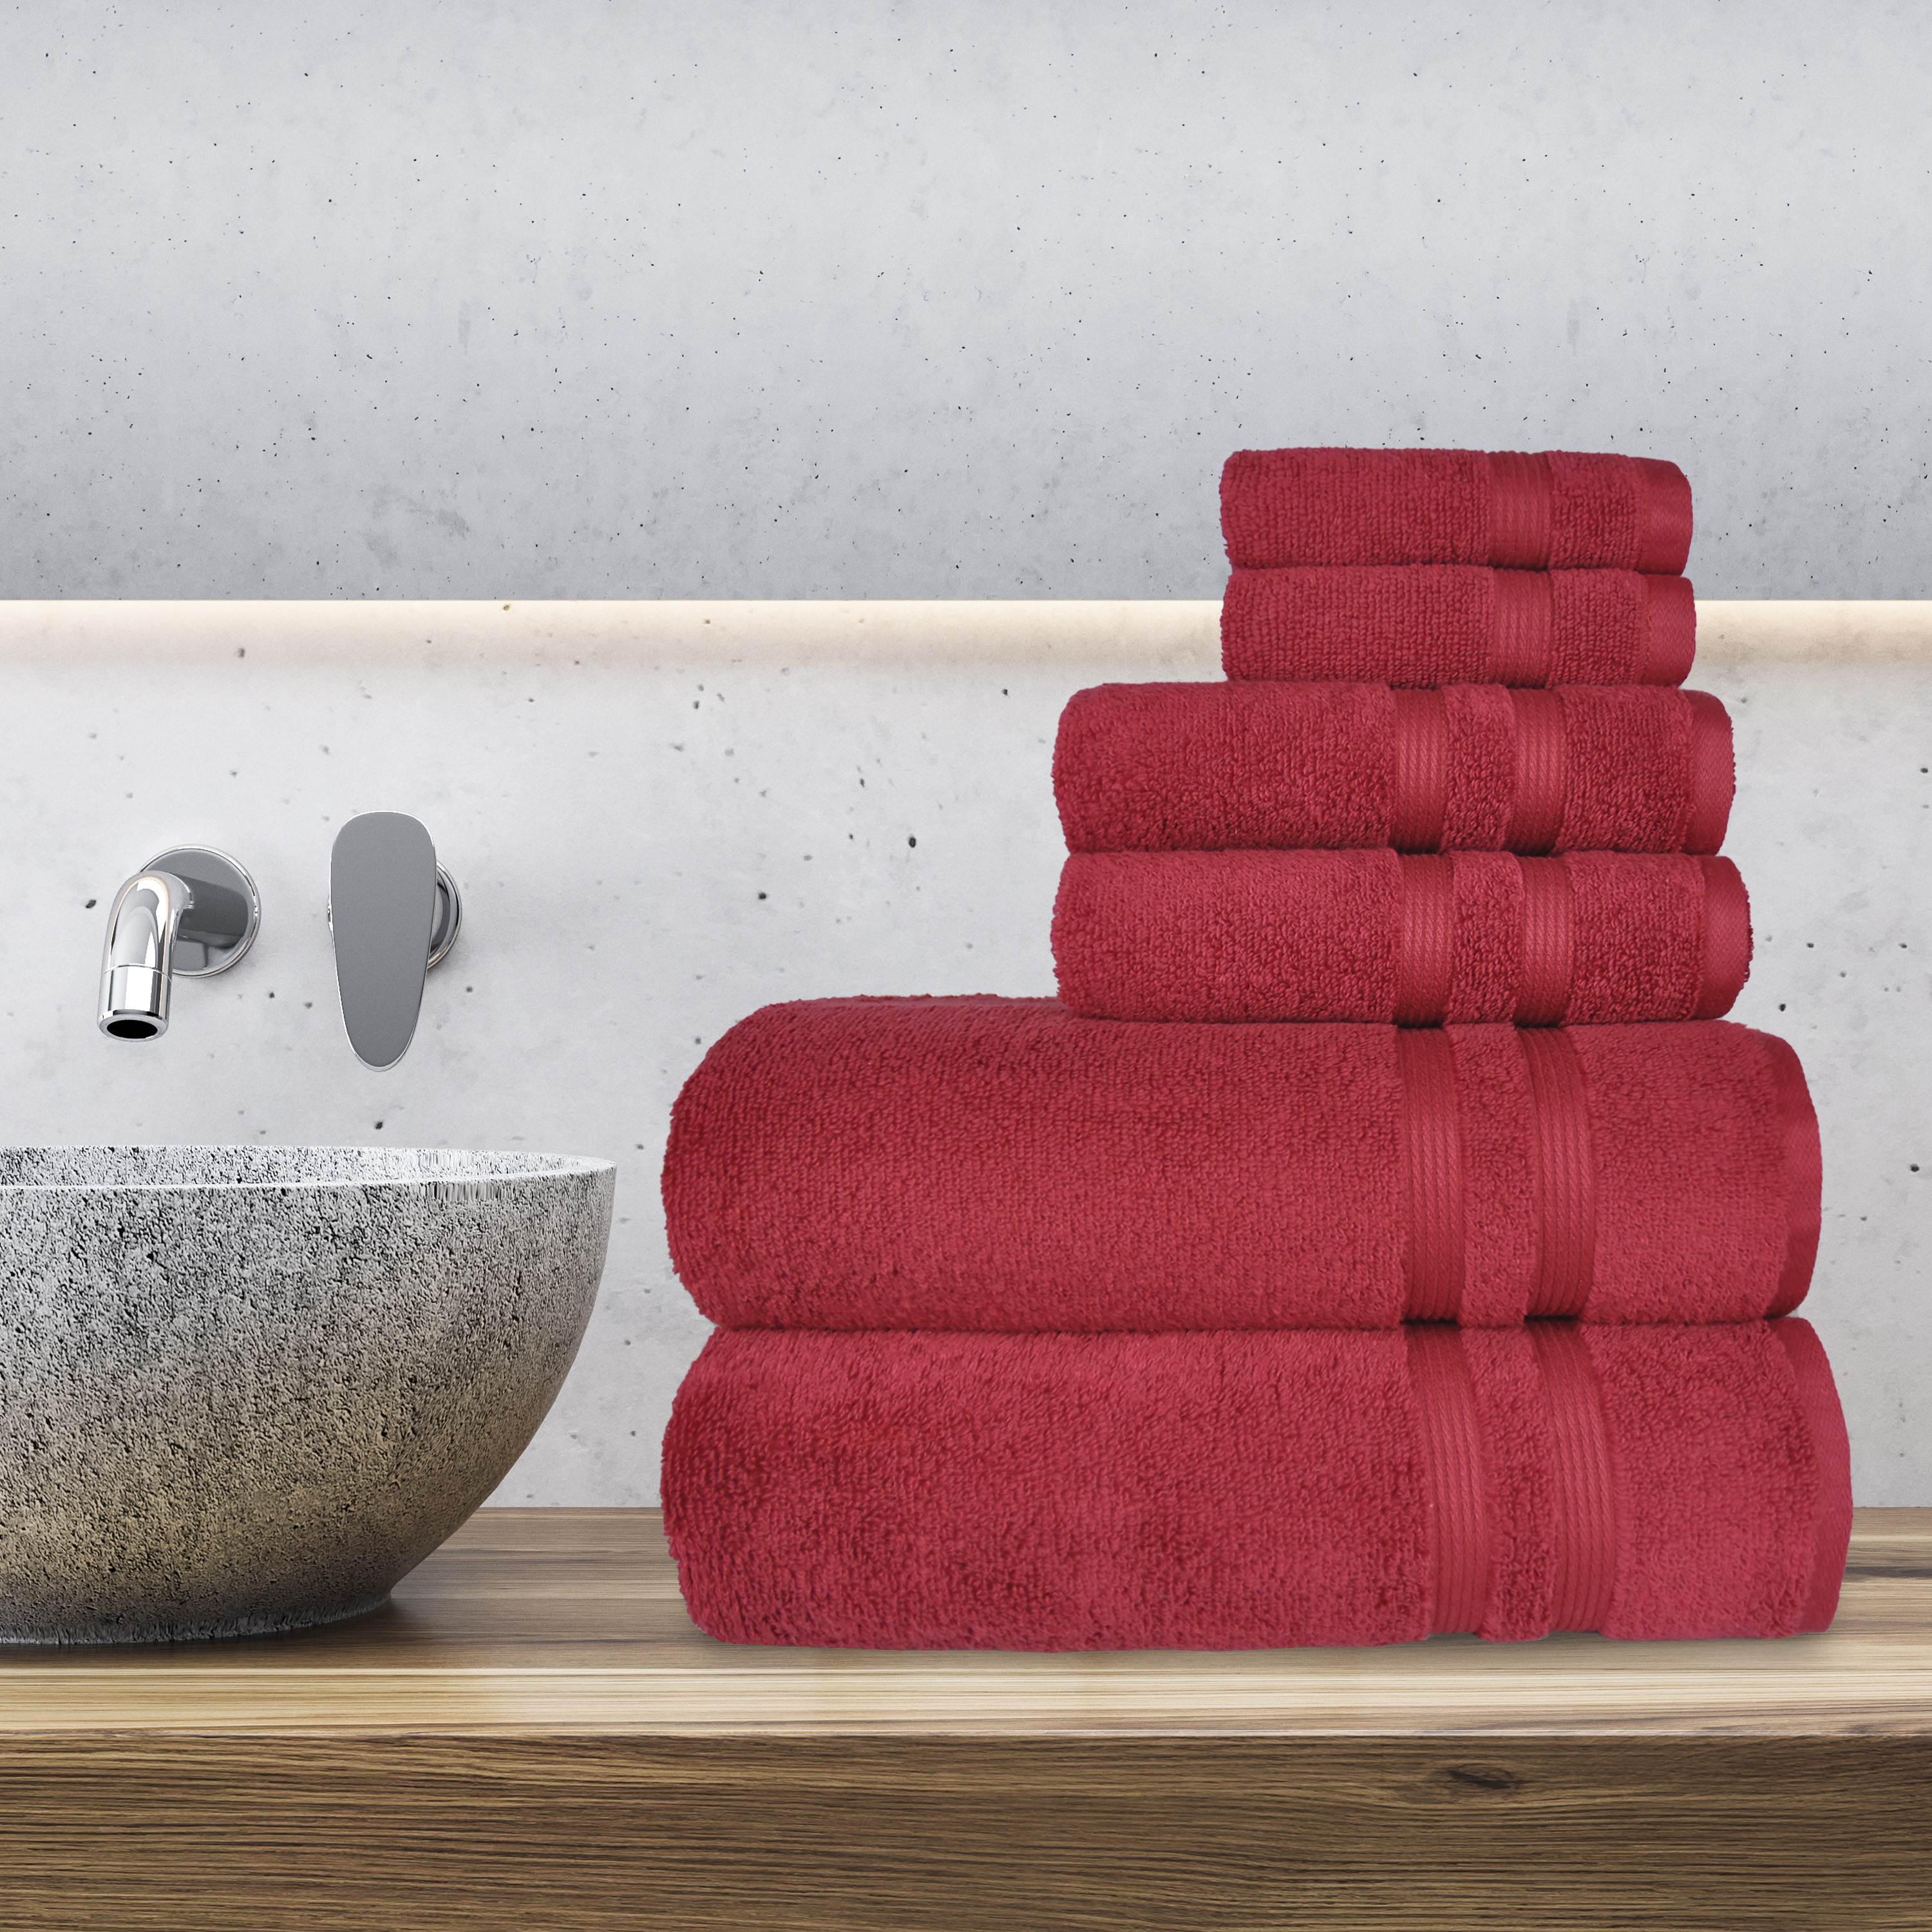 Mainstays Performance Solid 6 Piece Towel Set, Red - image 1 of 7